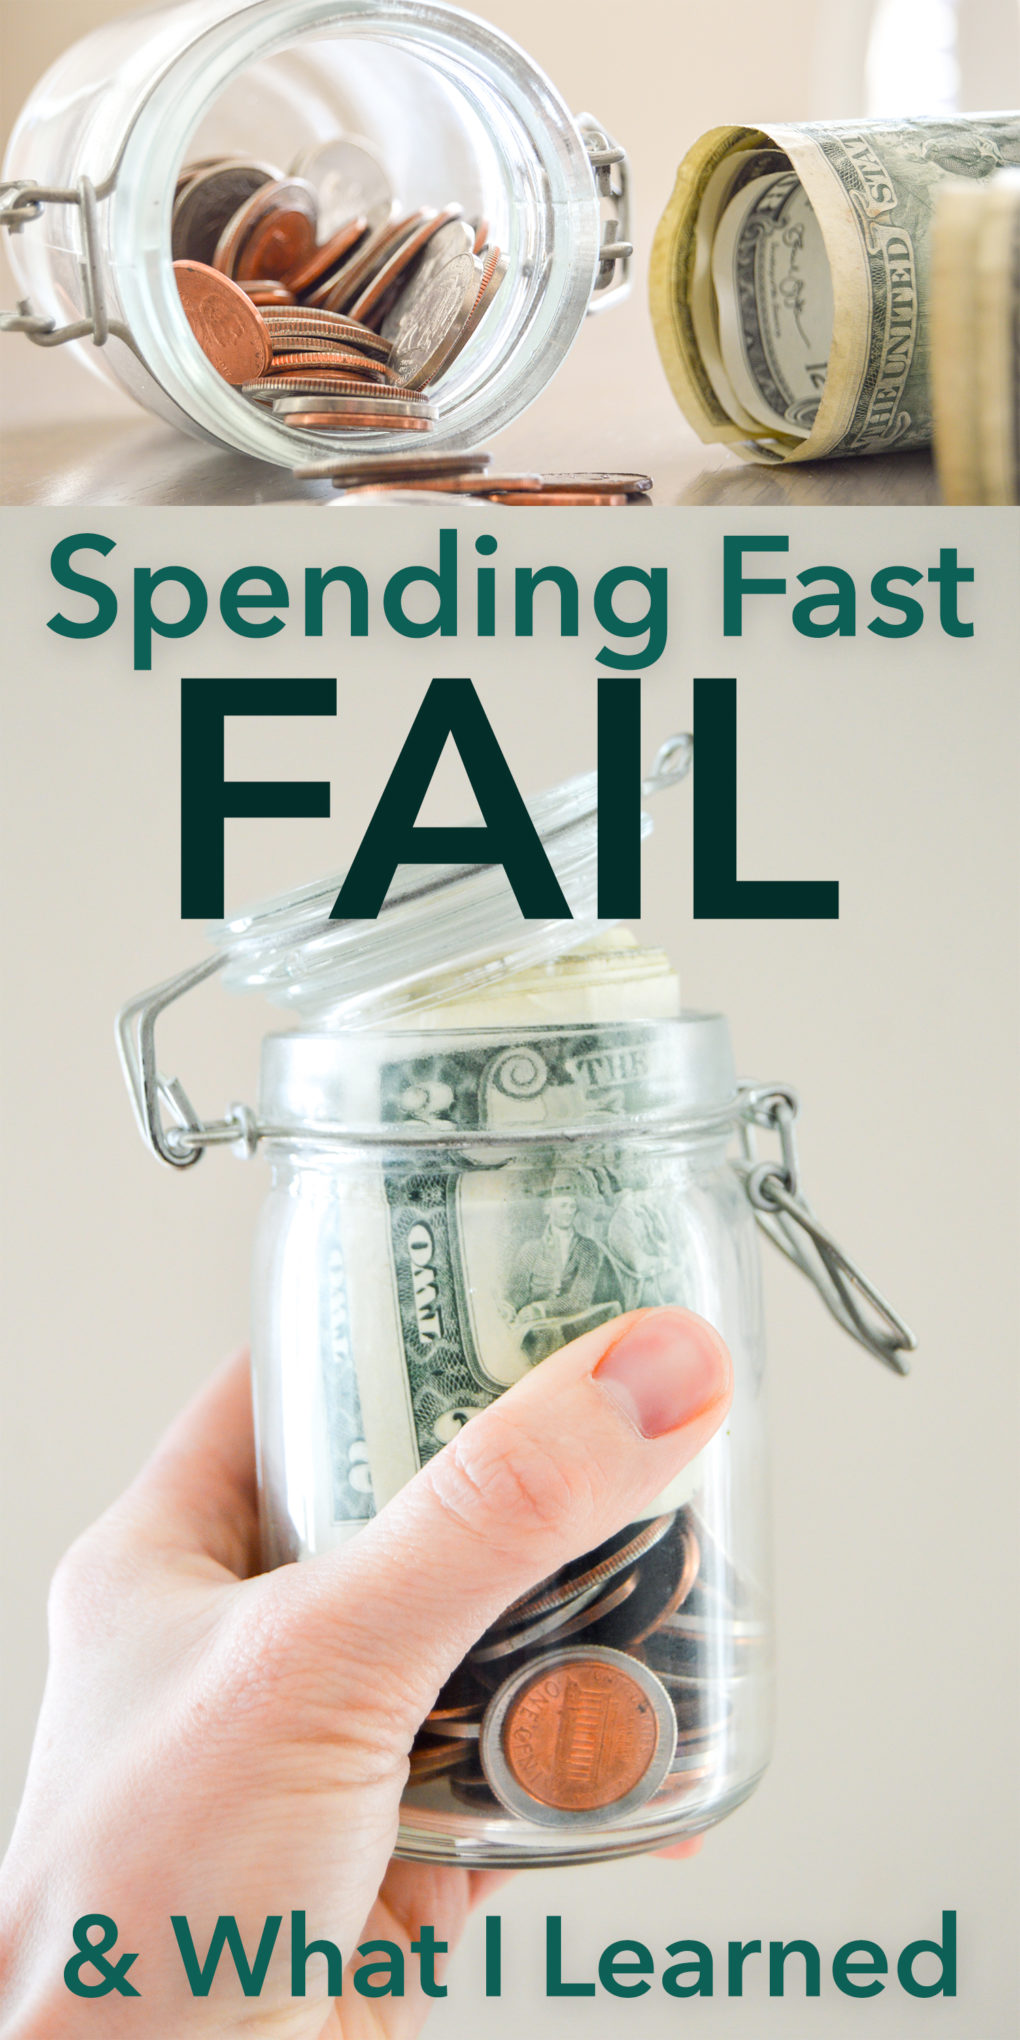 Lessons learned from our month long spending fast. What we bought and how we failed. Why budgeting is good but not spending money is stupid. Budgeting, fiscal fast, and money management. Family finance tips.